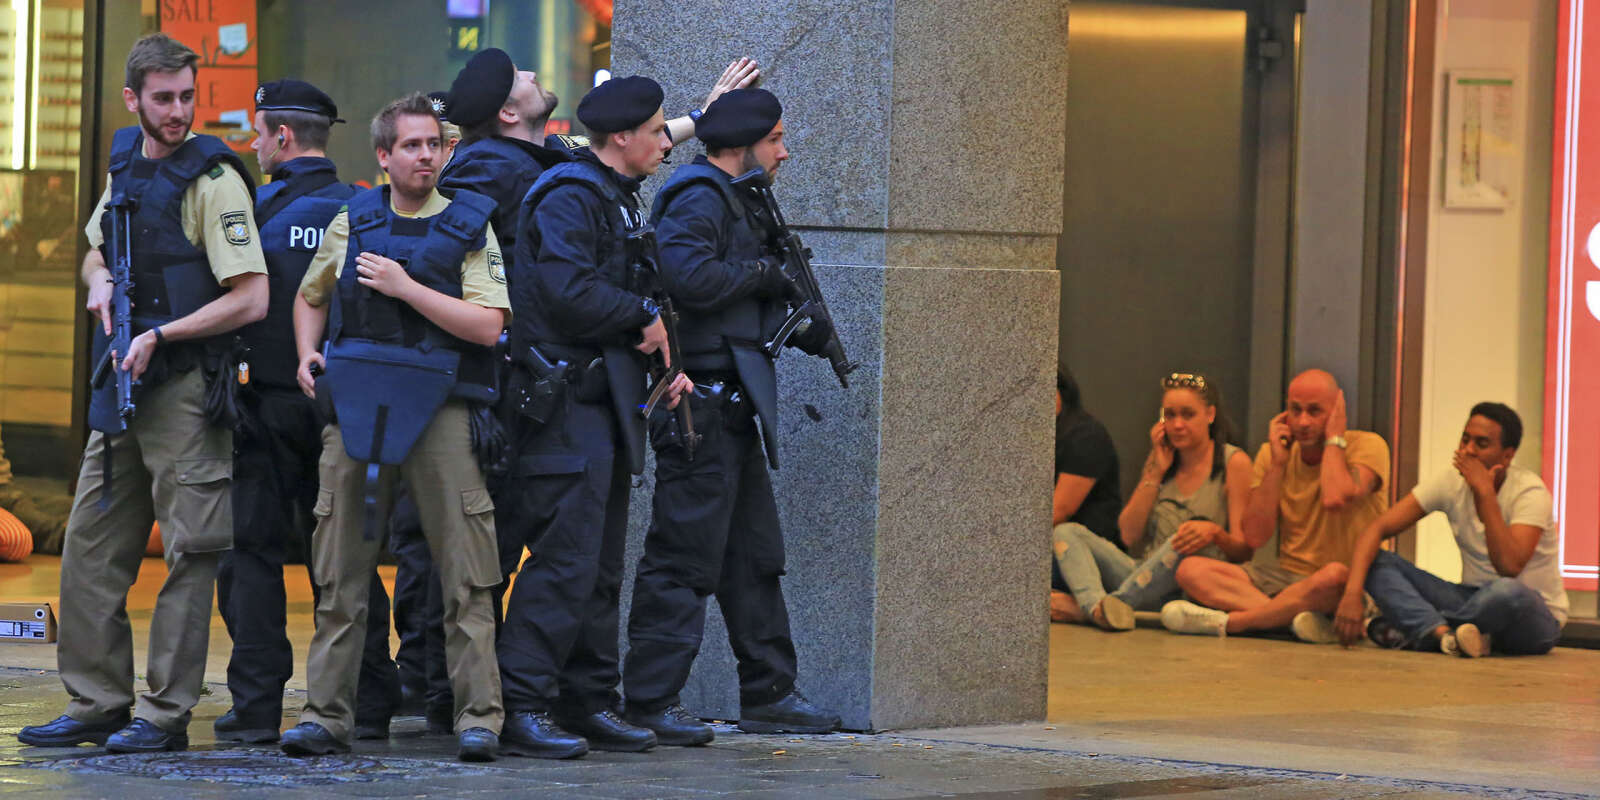 In this Friday, July 22, 2016 photo provided by Wael Ladki people take shelter as armed police officers are on the hunt for possible fugitives after a shooting in a shopping mall in Munich, southern Germany. A gunman killed 9 people before killing himself. (Wael Ladki via AP)